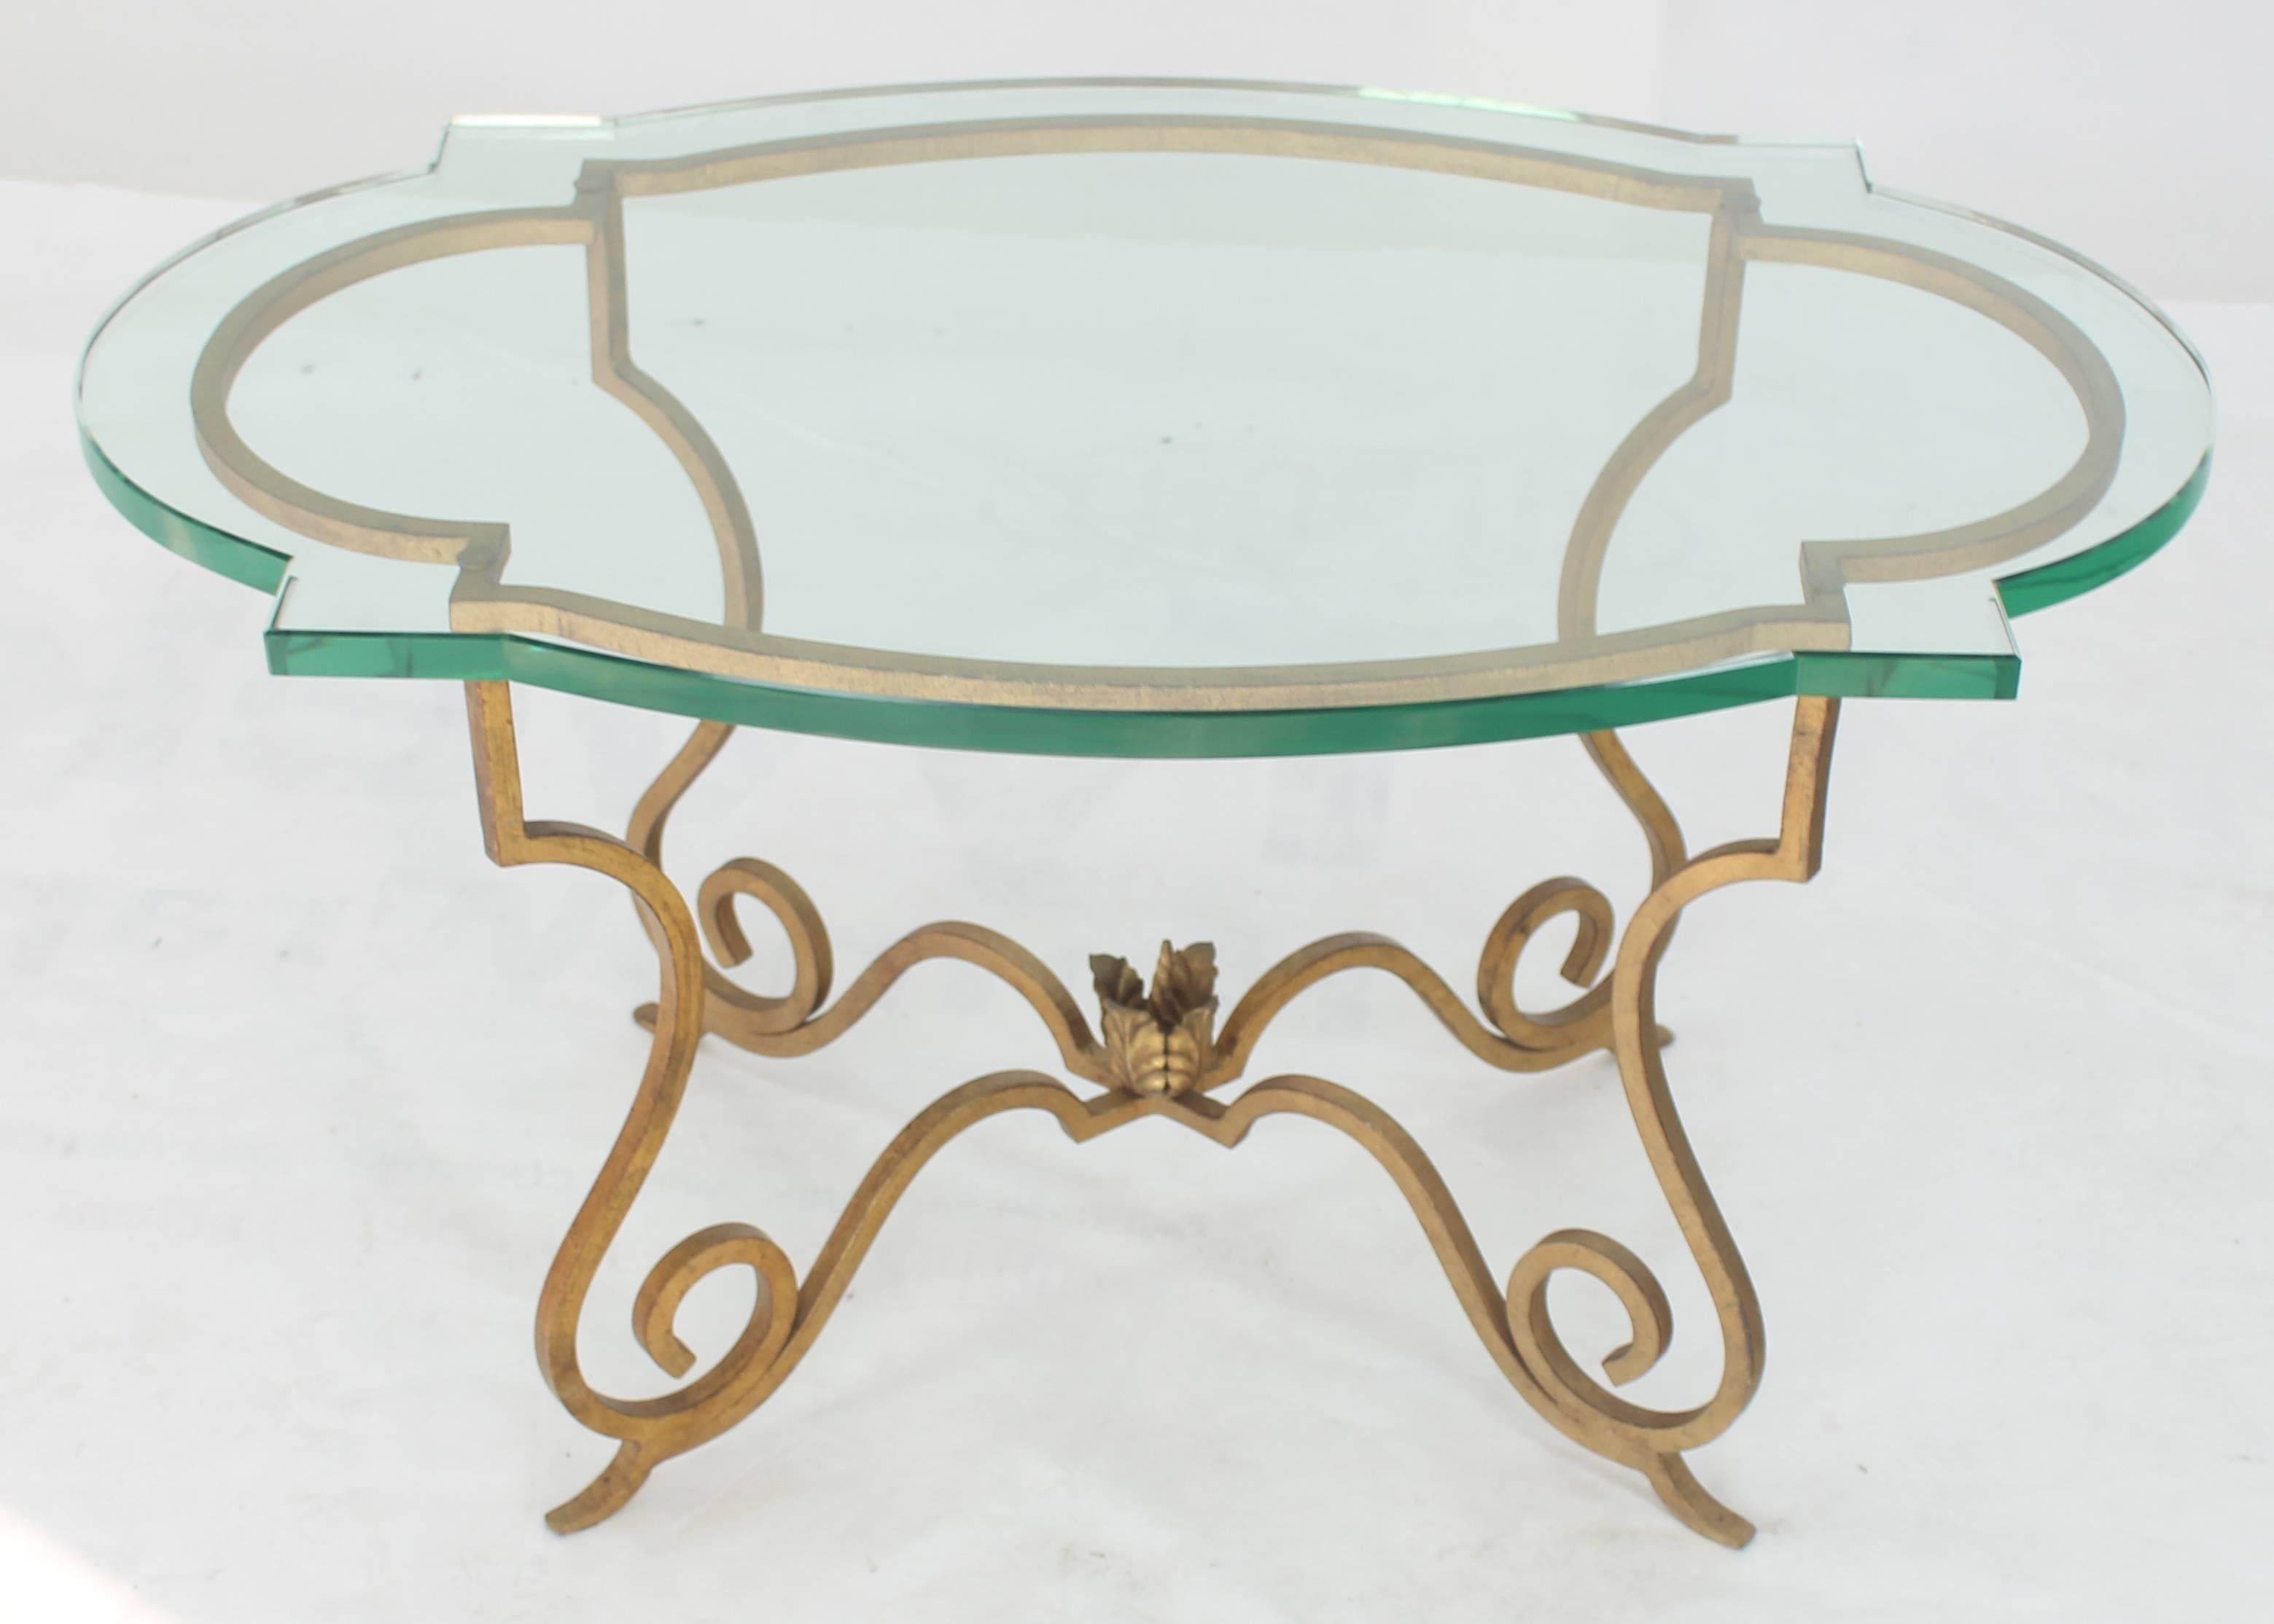 Forged steel base scallop shape glass top side table. Hollywood Regency Mid-Century Modern style. 3/4